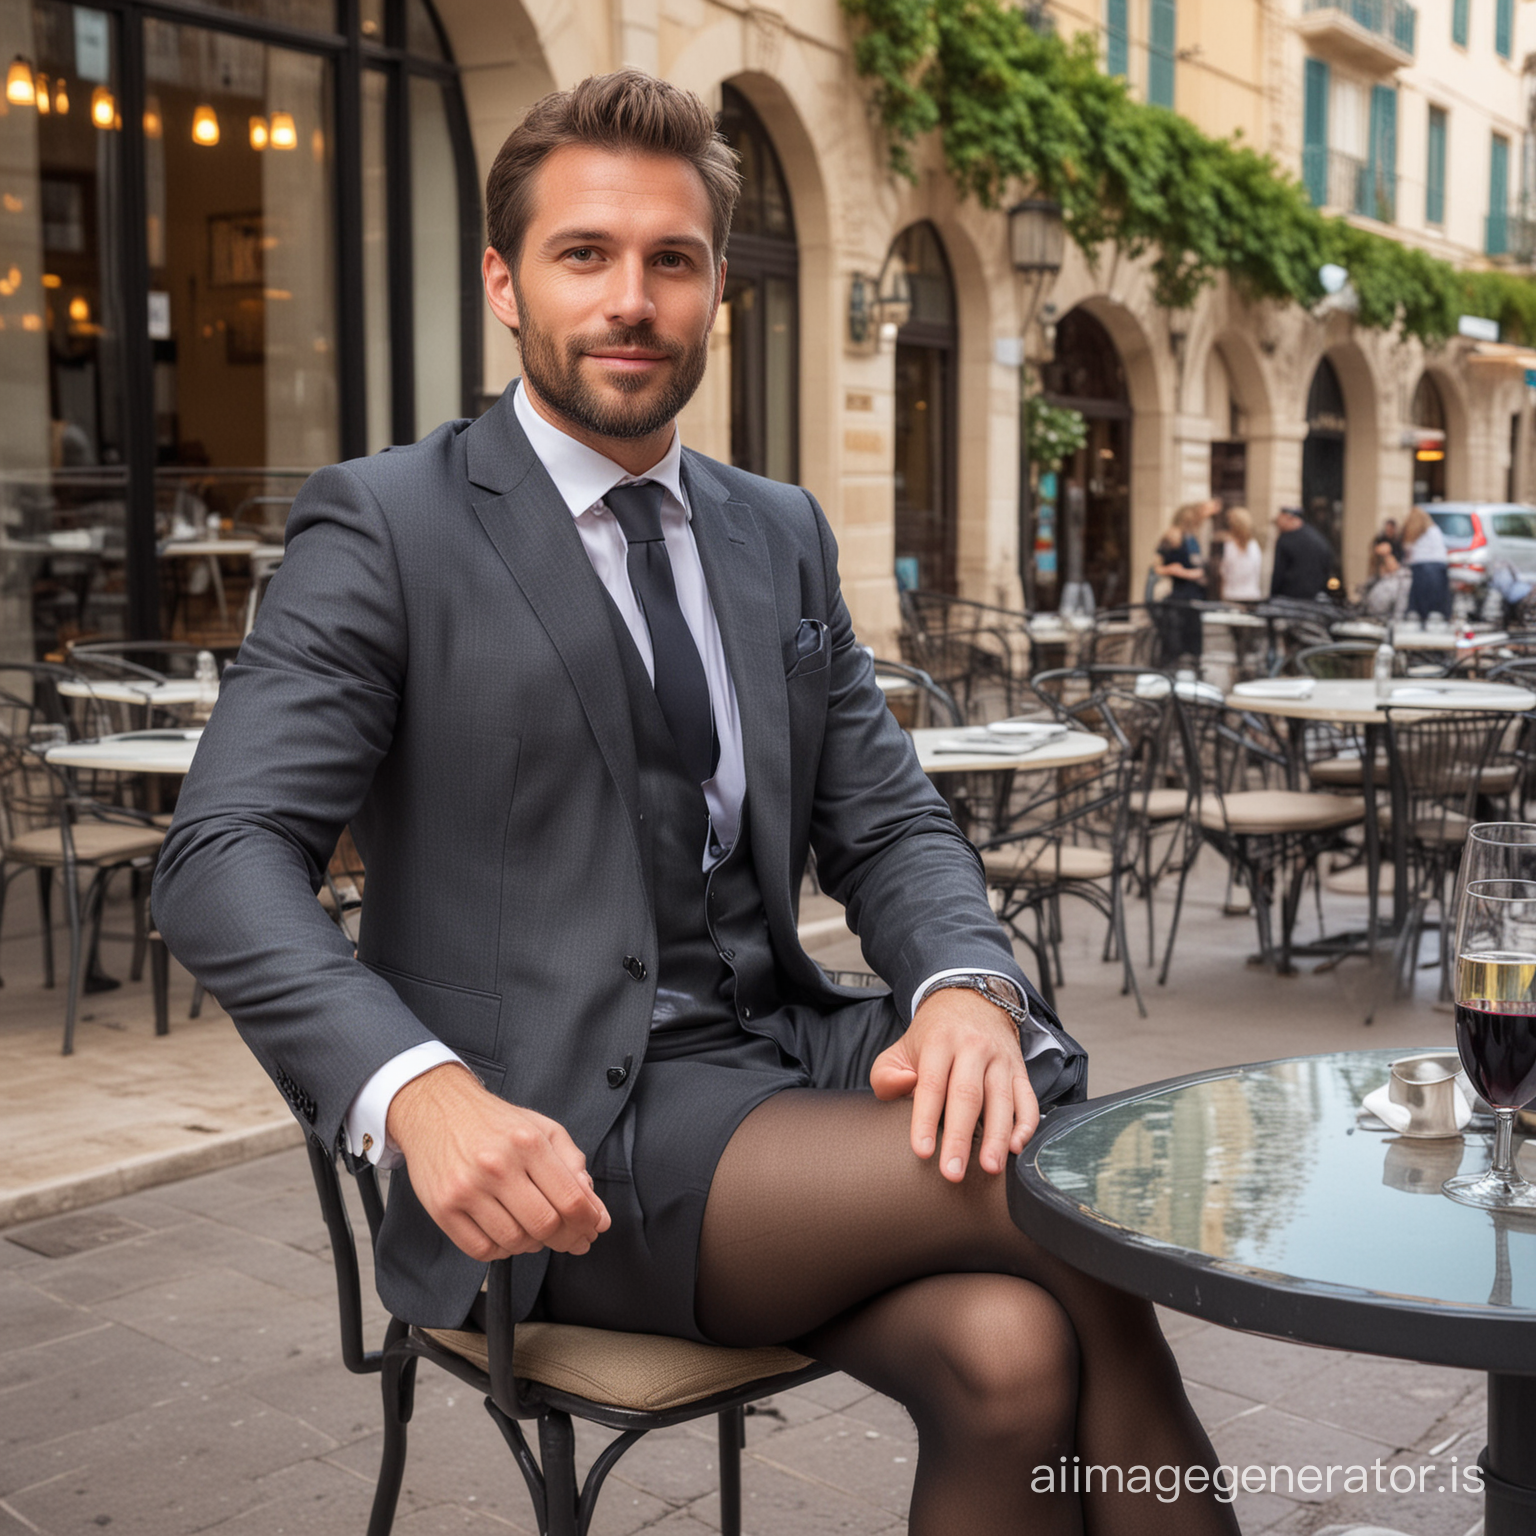 Handsome rugged scruffy well-built 32-year old business man wearing sheer tights sitting on a chair at a table of a streetside café in Monaco and drinking wine